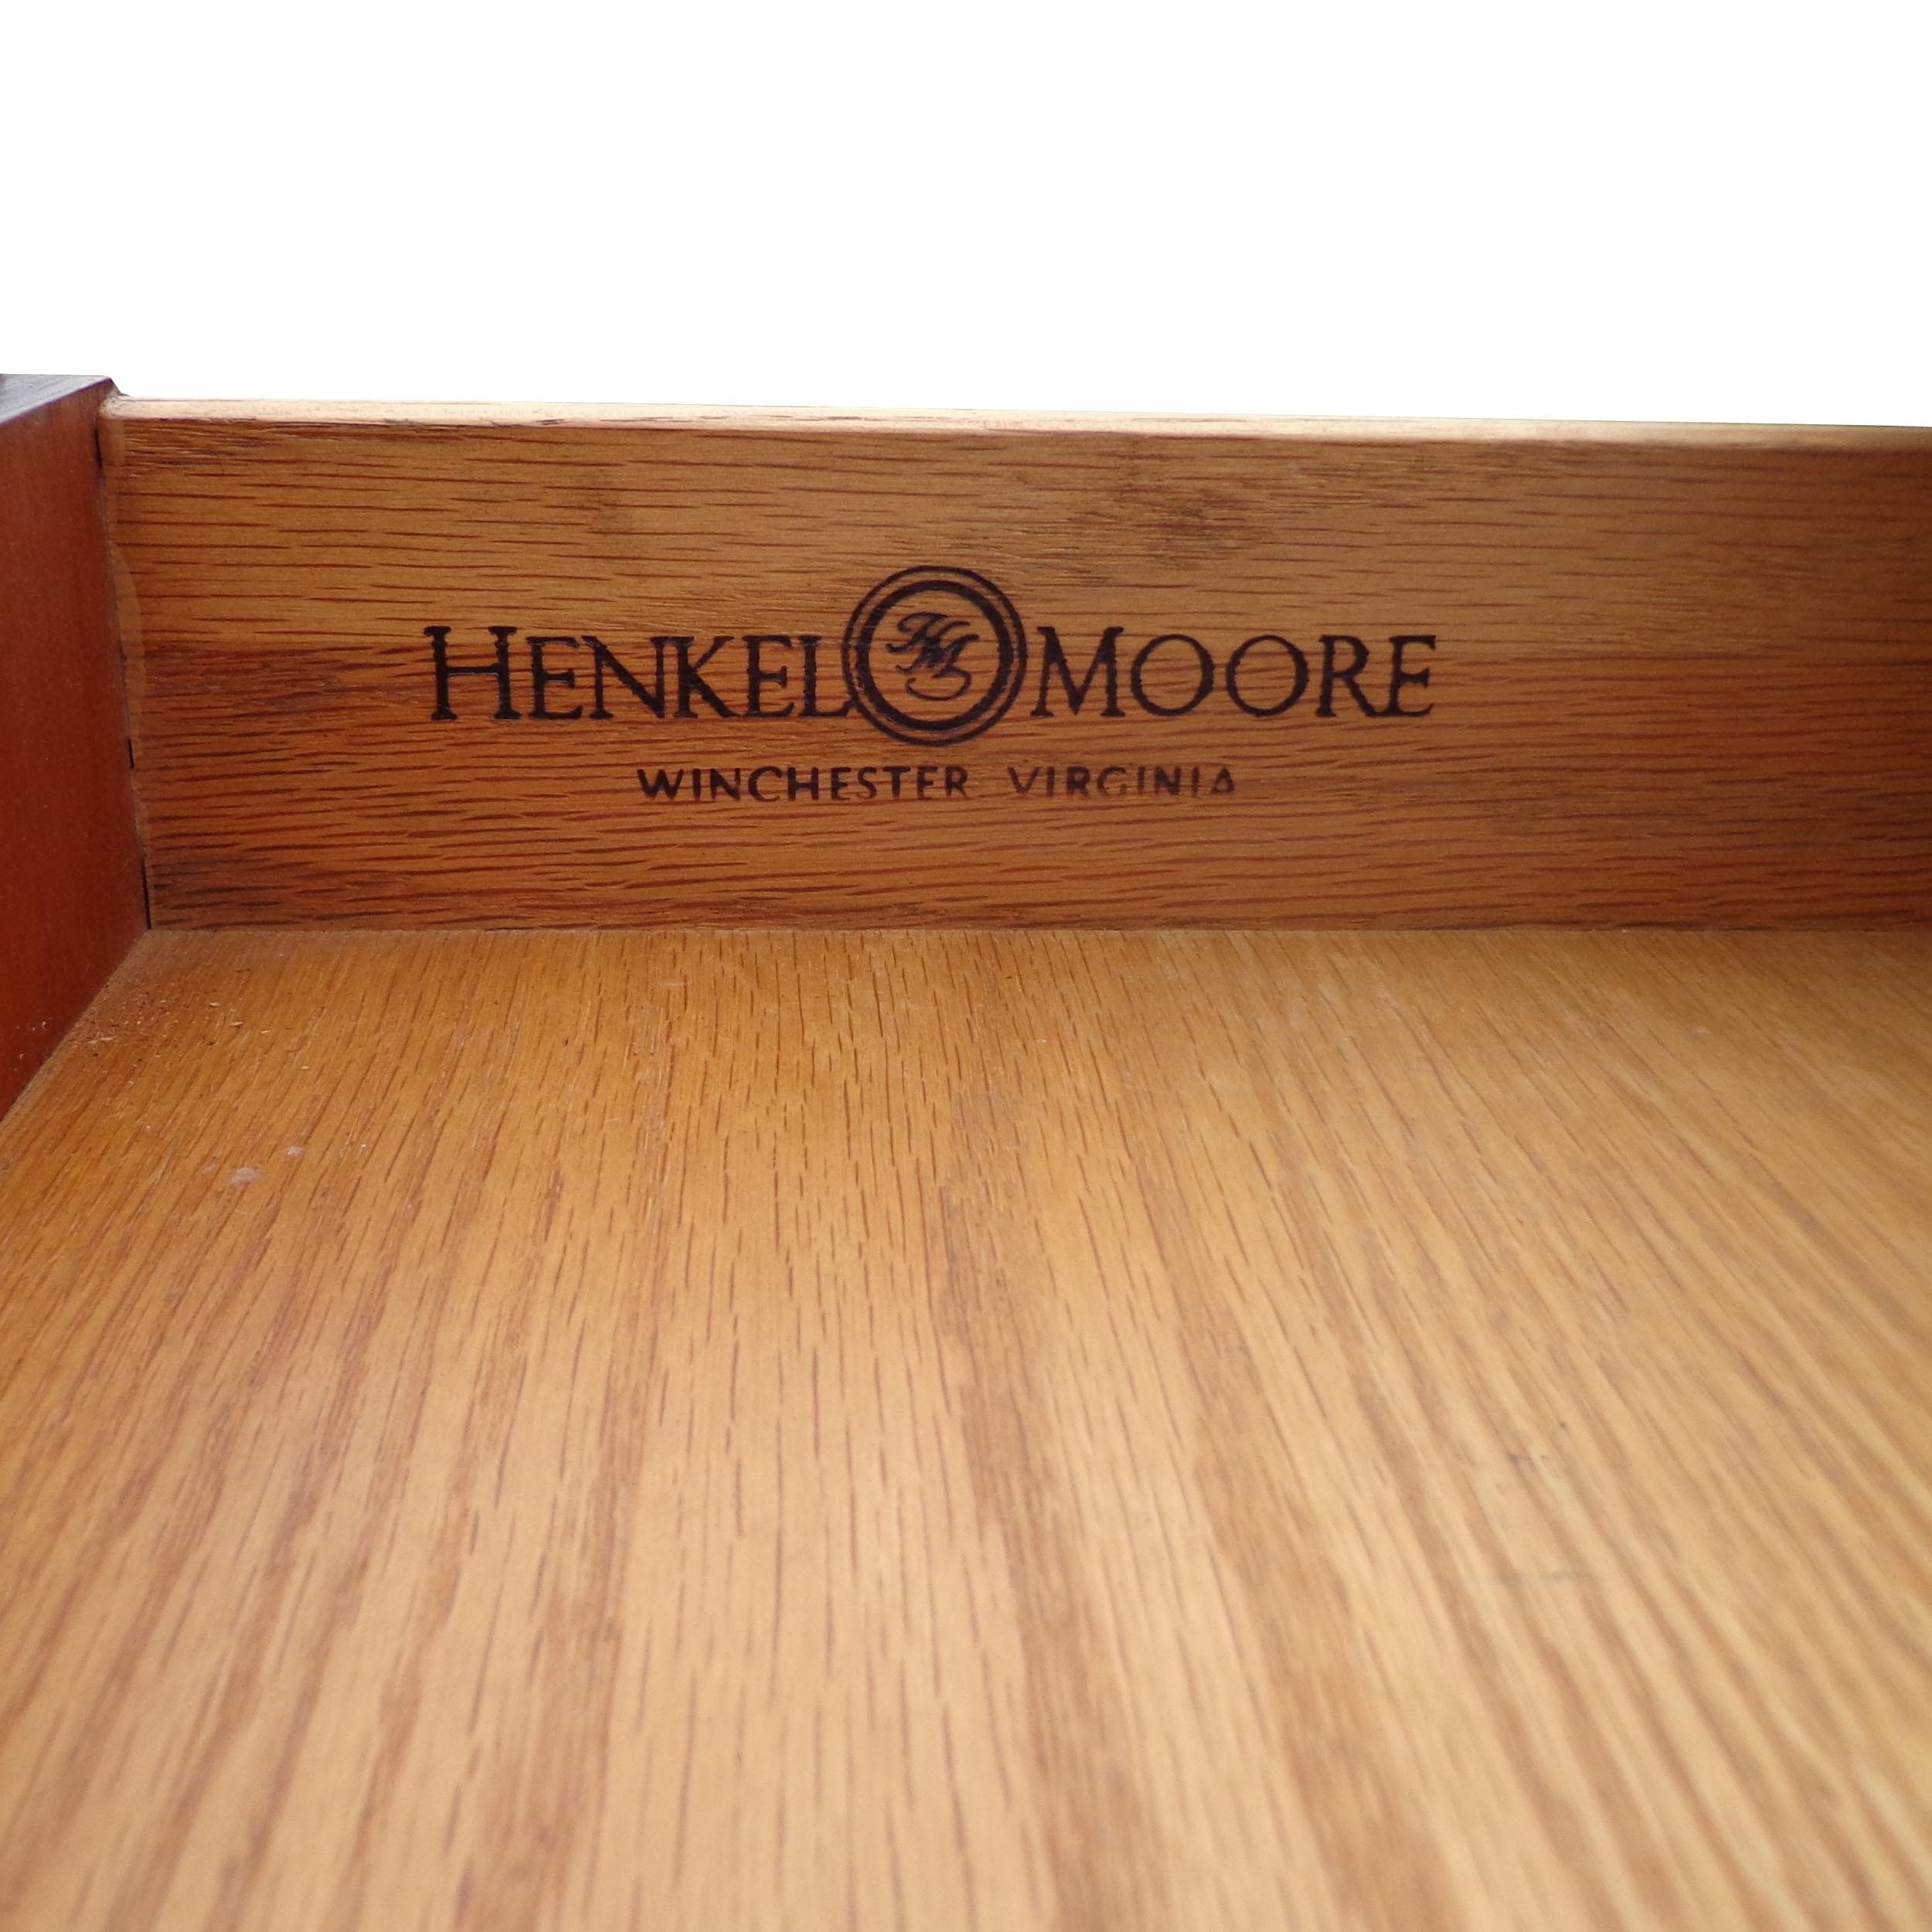 Henkel Moore Chippendale Mahogany Leather Top Ball and Claw Executive Desk For Sale 3